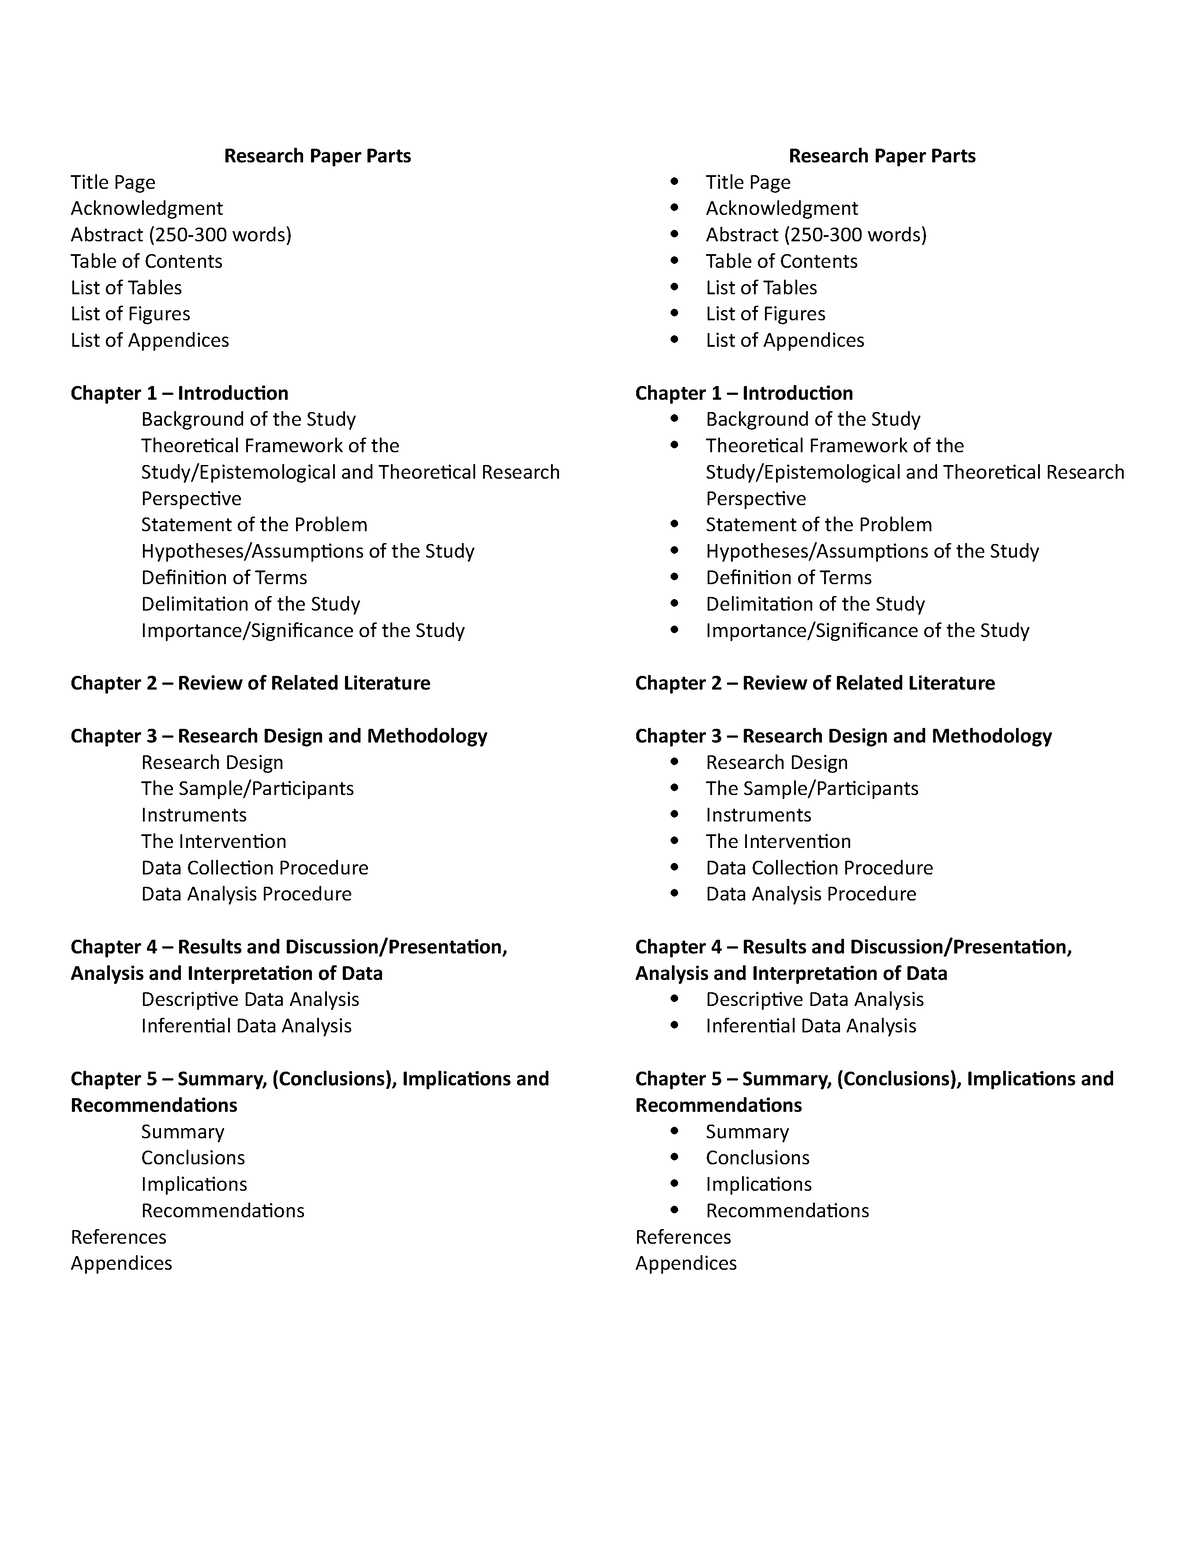 parts of research paper and description